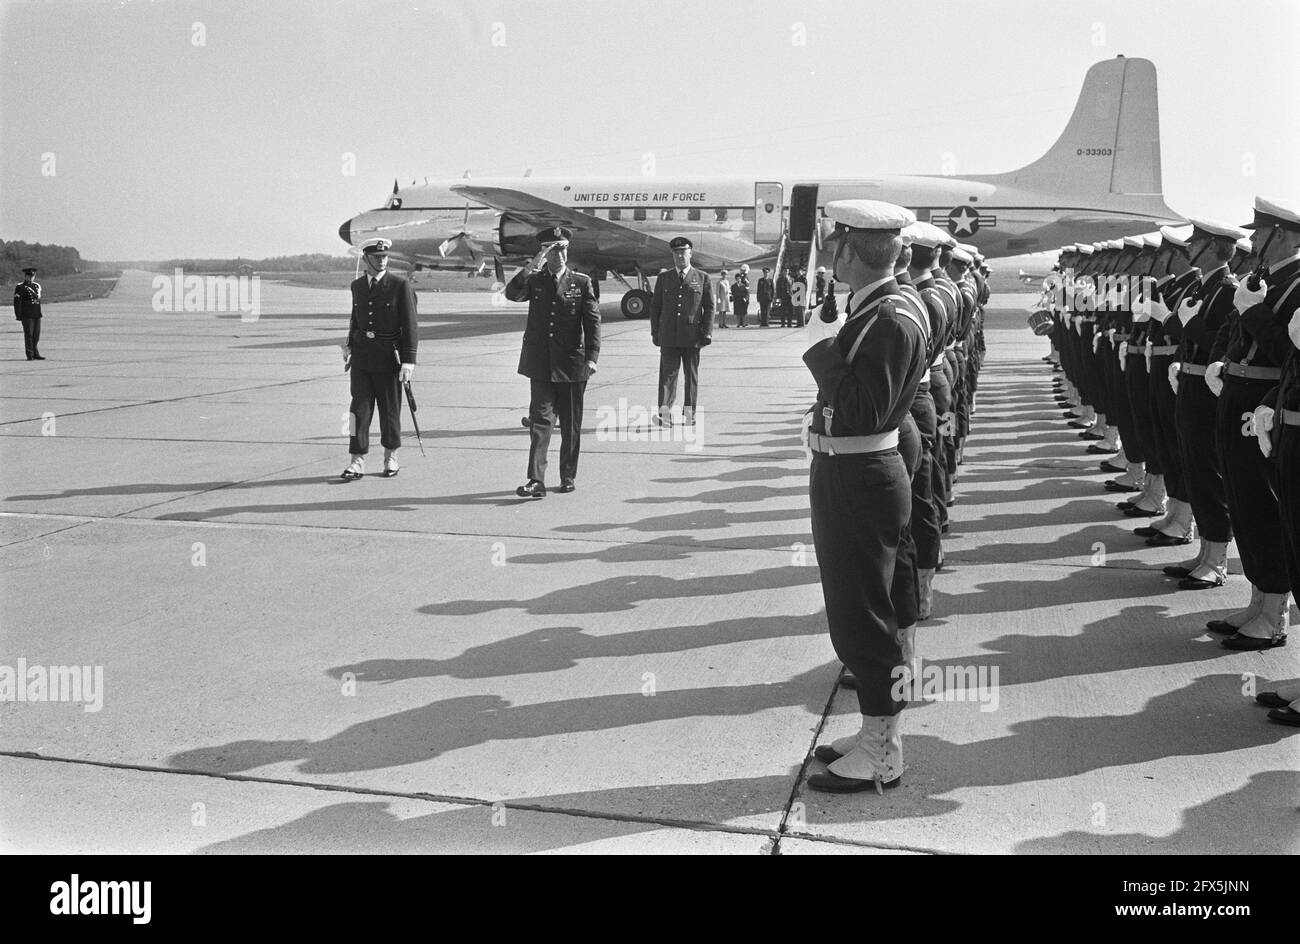 General A. J. Goodpaster, Commander-in-Chief of the Allied Forces in Europe, arrives at Ypenburg: Gen. Goodpaster inspects the guard of honor, September 8, 1969, guards of honor, generals, commanders-in-chief, The Netherlands, 20th century press agency photo, news to remember, documentary, historic photography 1945-1990, visual stories, human history of the Twentieth Century, capturing moments in time Stock Photo